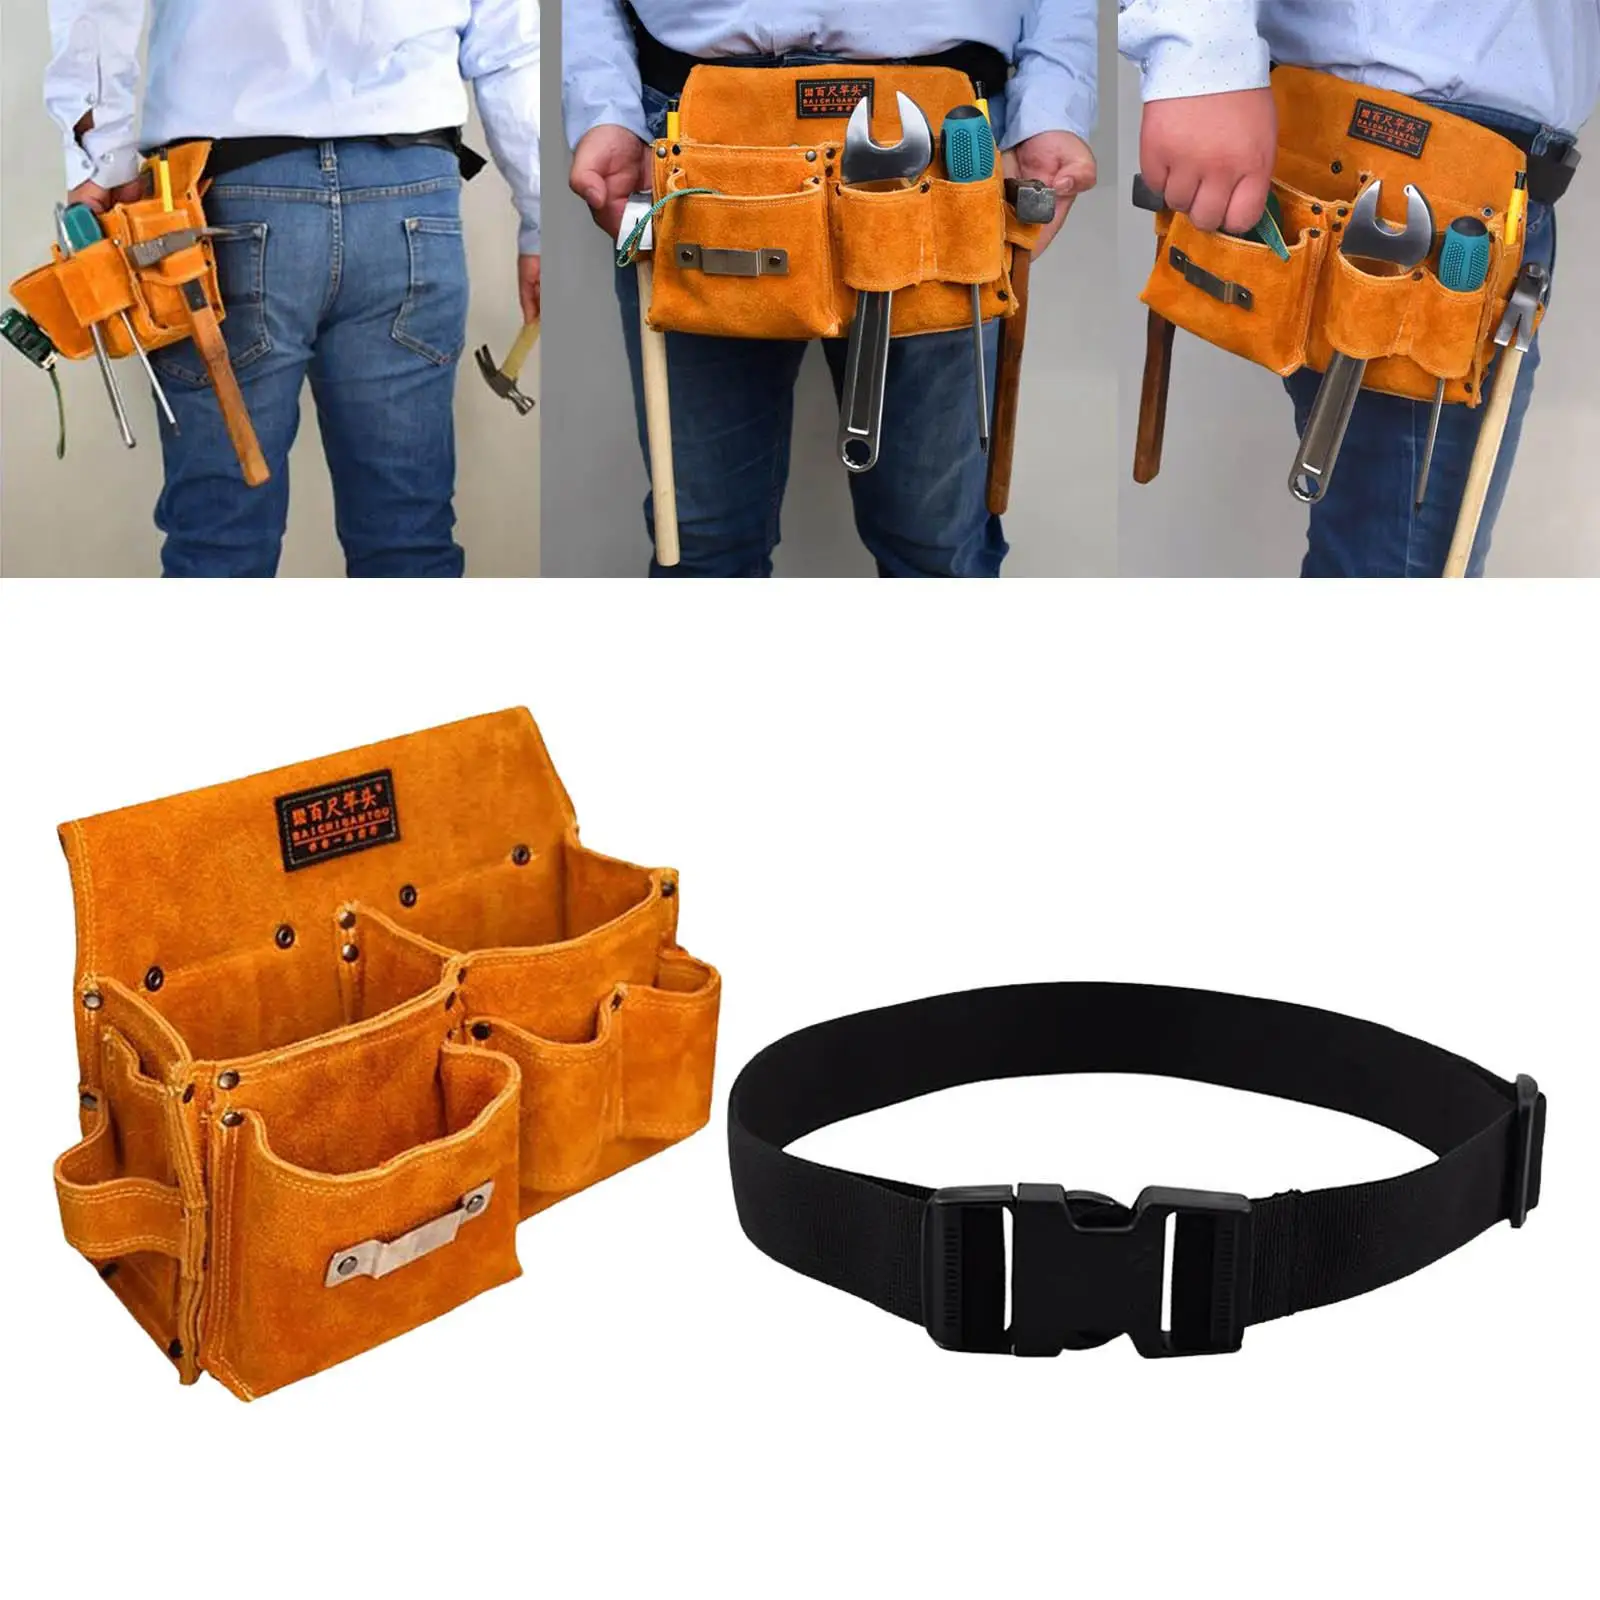 Retro Tool Bag Water Proof Large Capacity Organizer Durable Portable Waist Pack Holder Tool Belt Bag for Electrician Woodworking